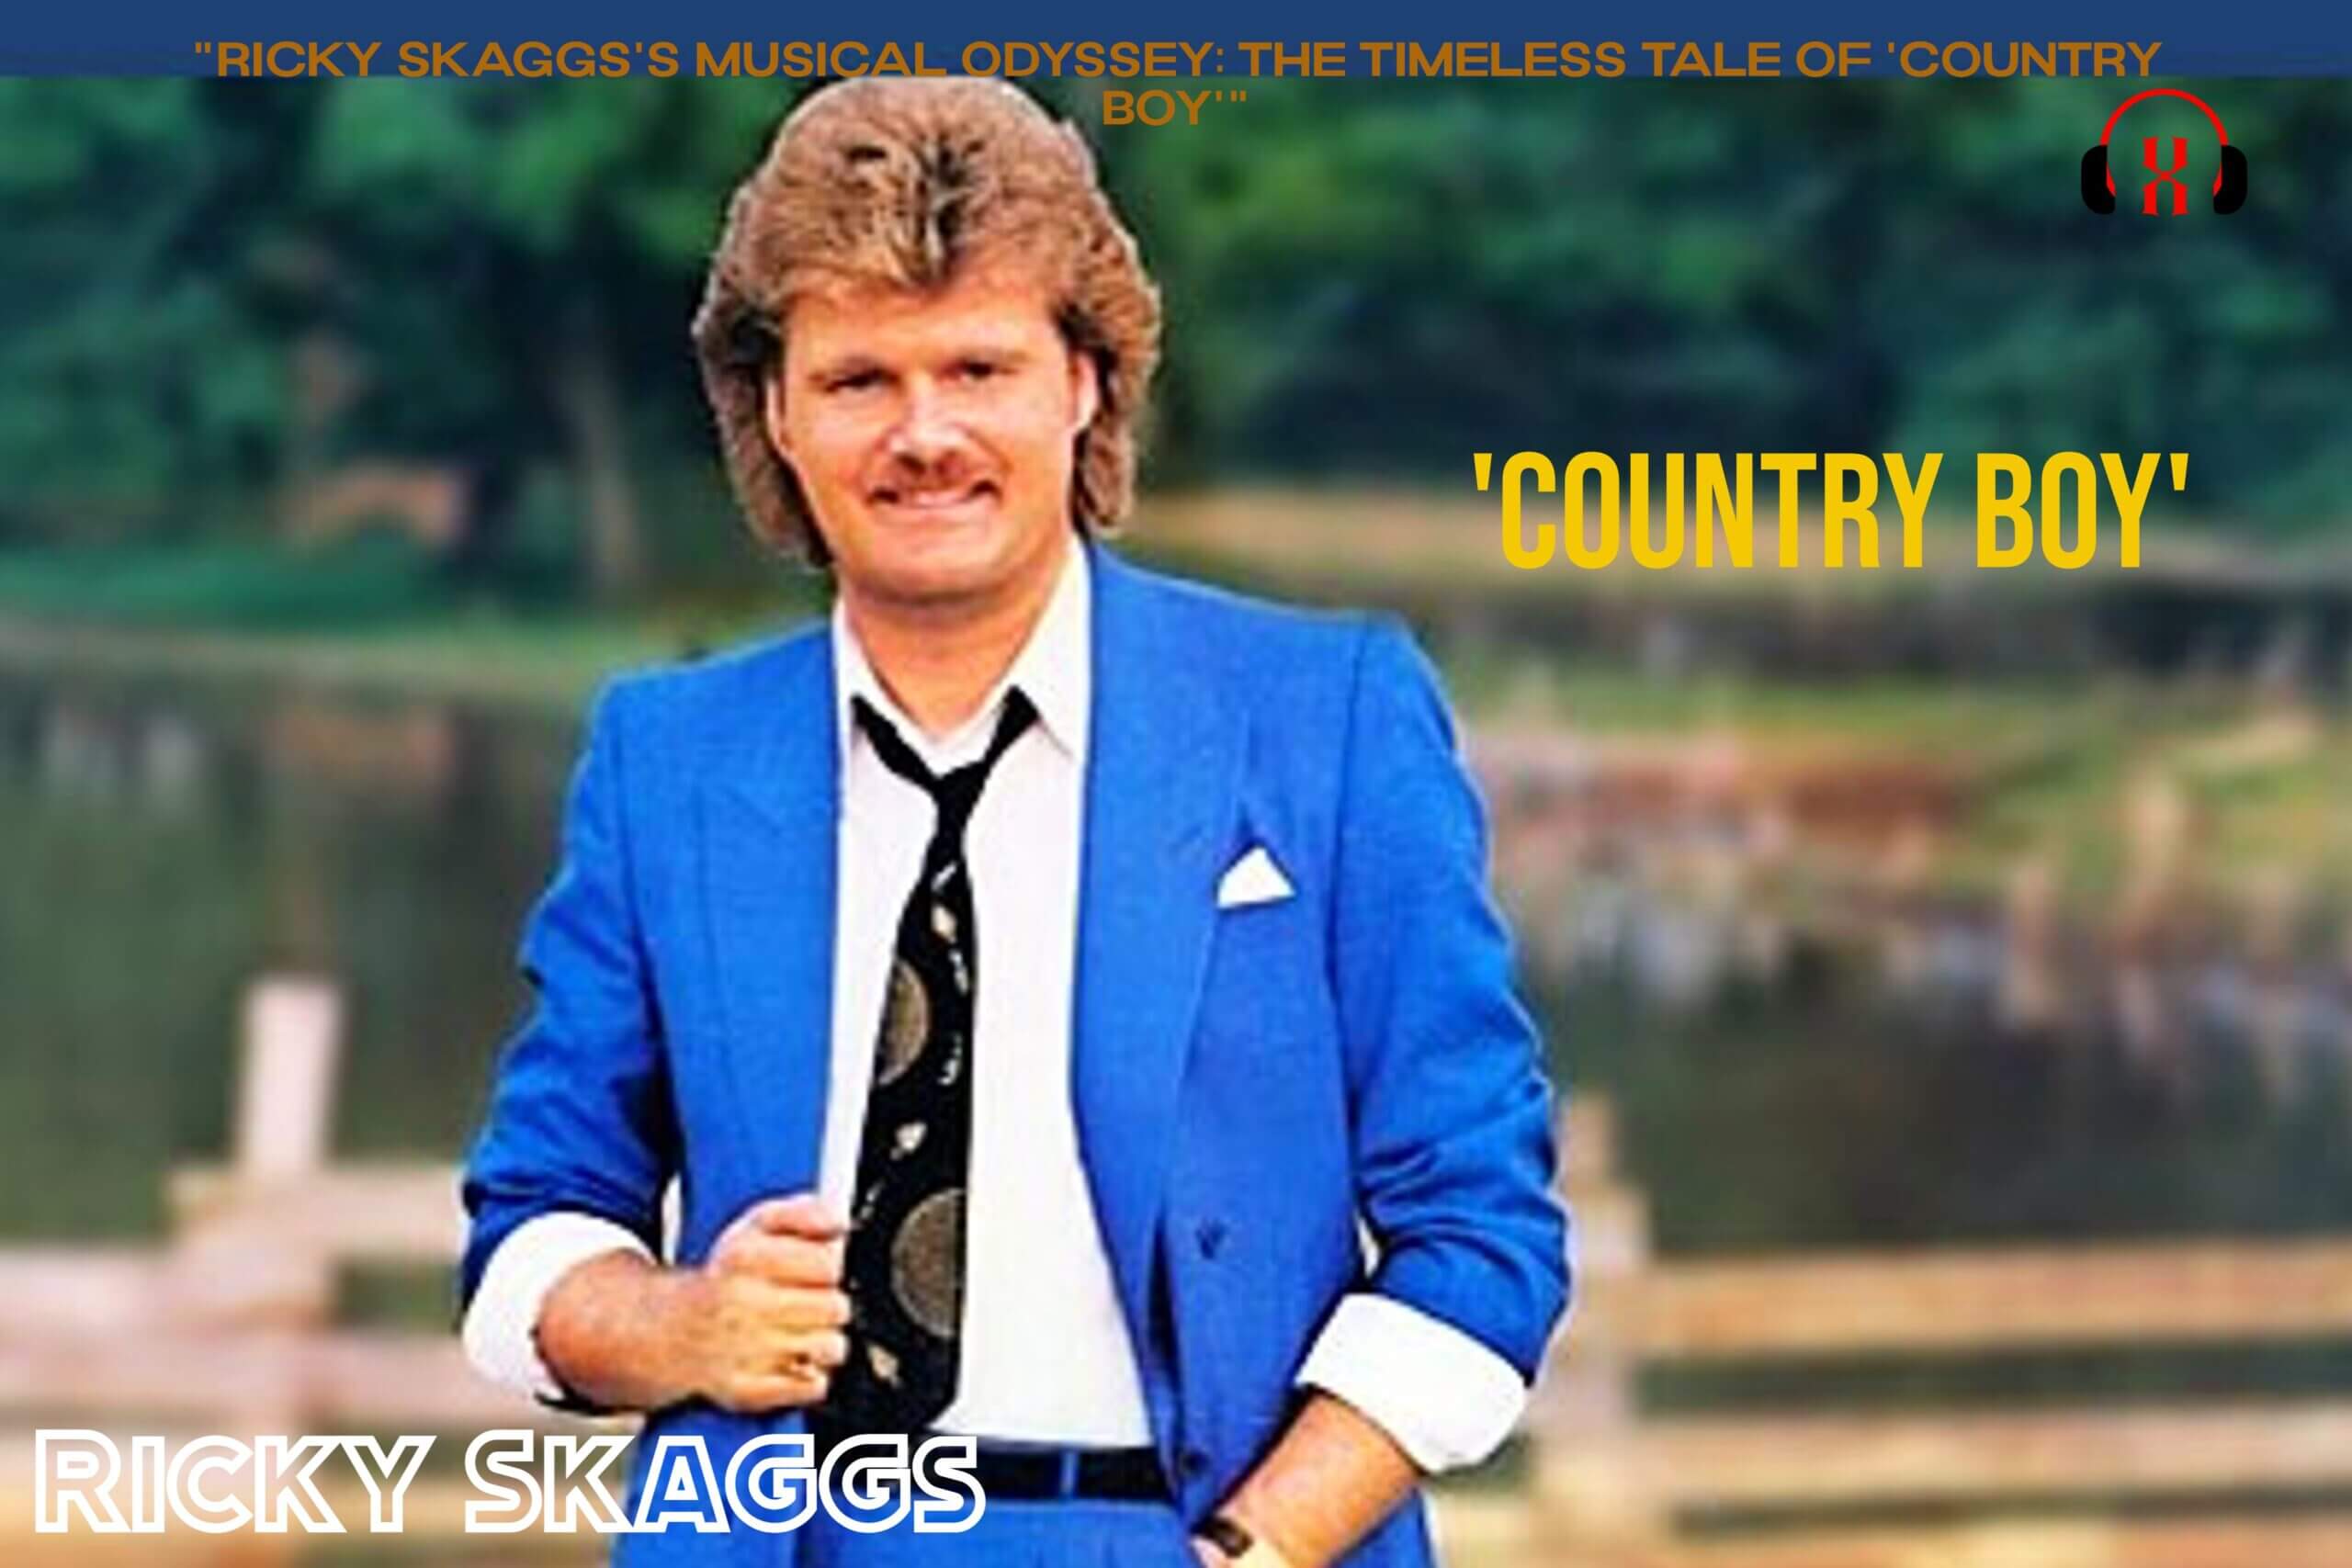 "Ricky Skaggs's Musical Odyssey: The Timeless Tale of 'Country Boy'"